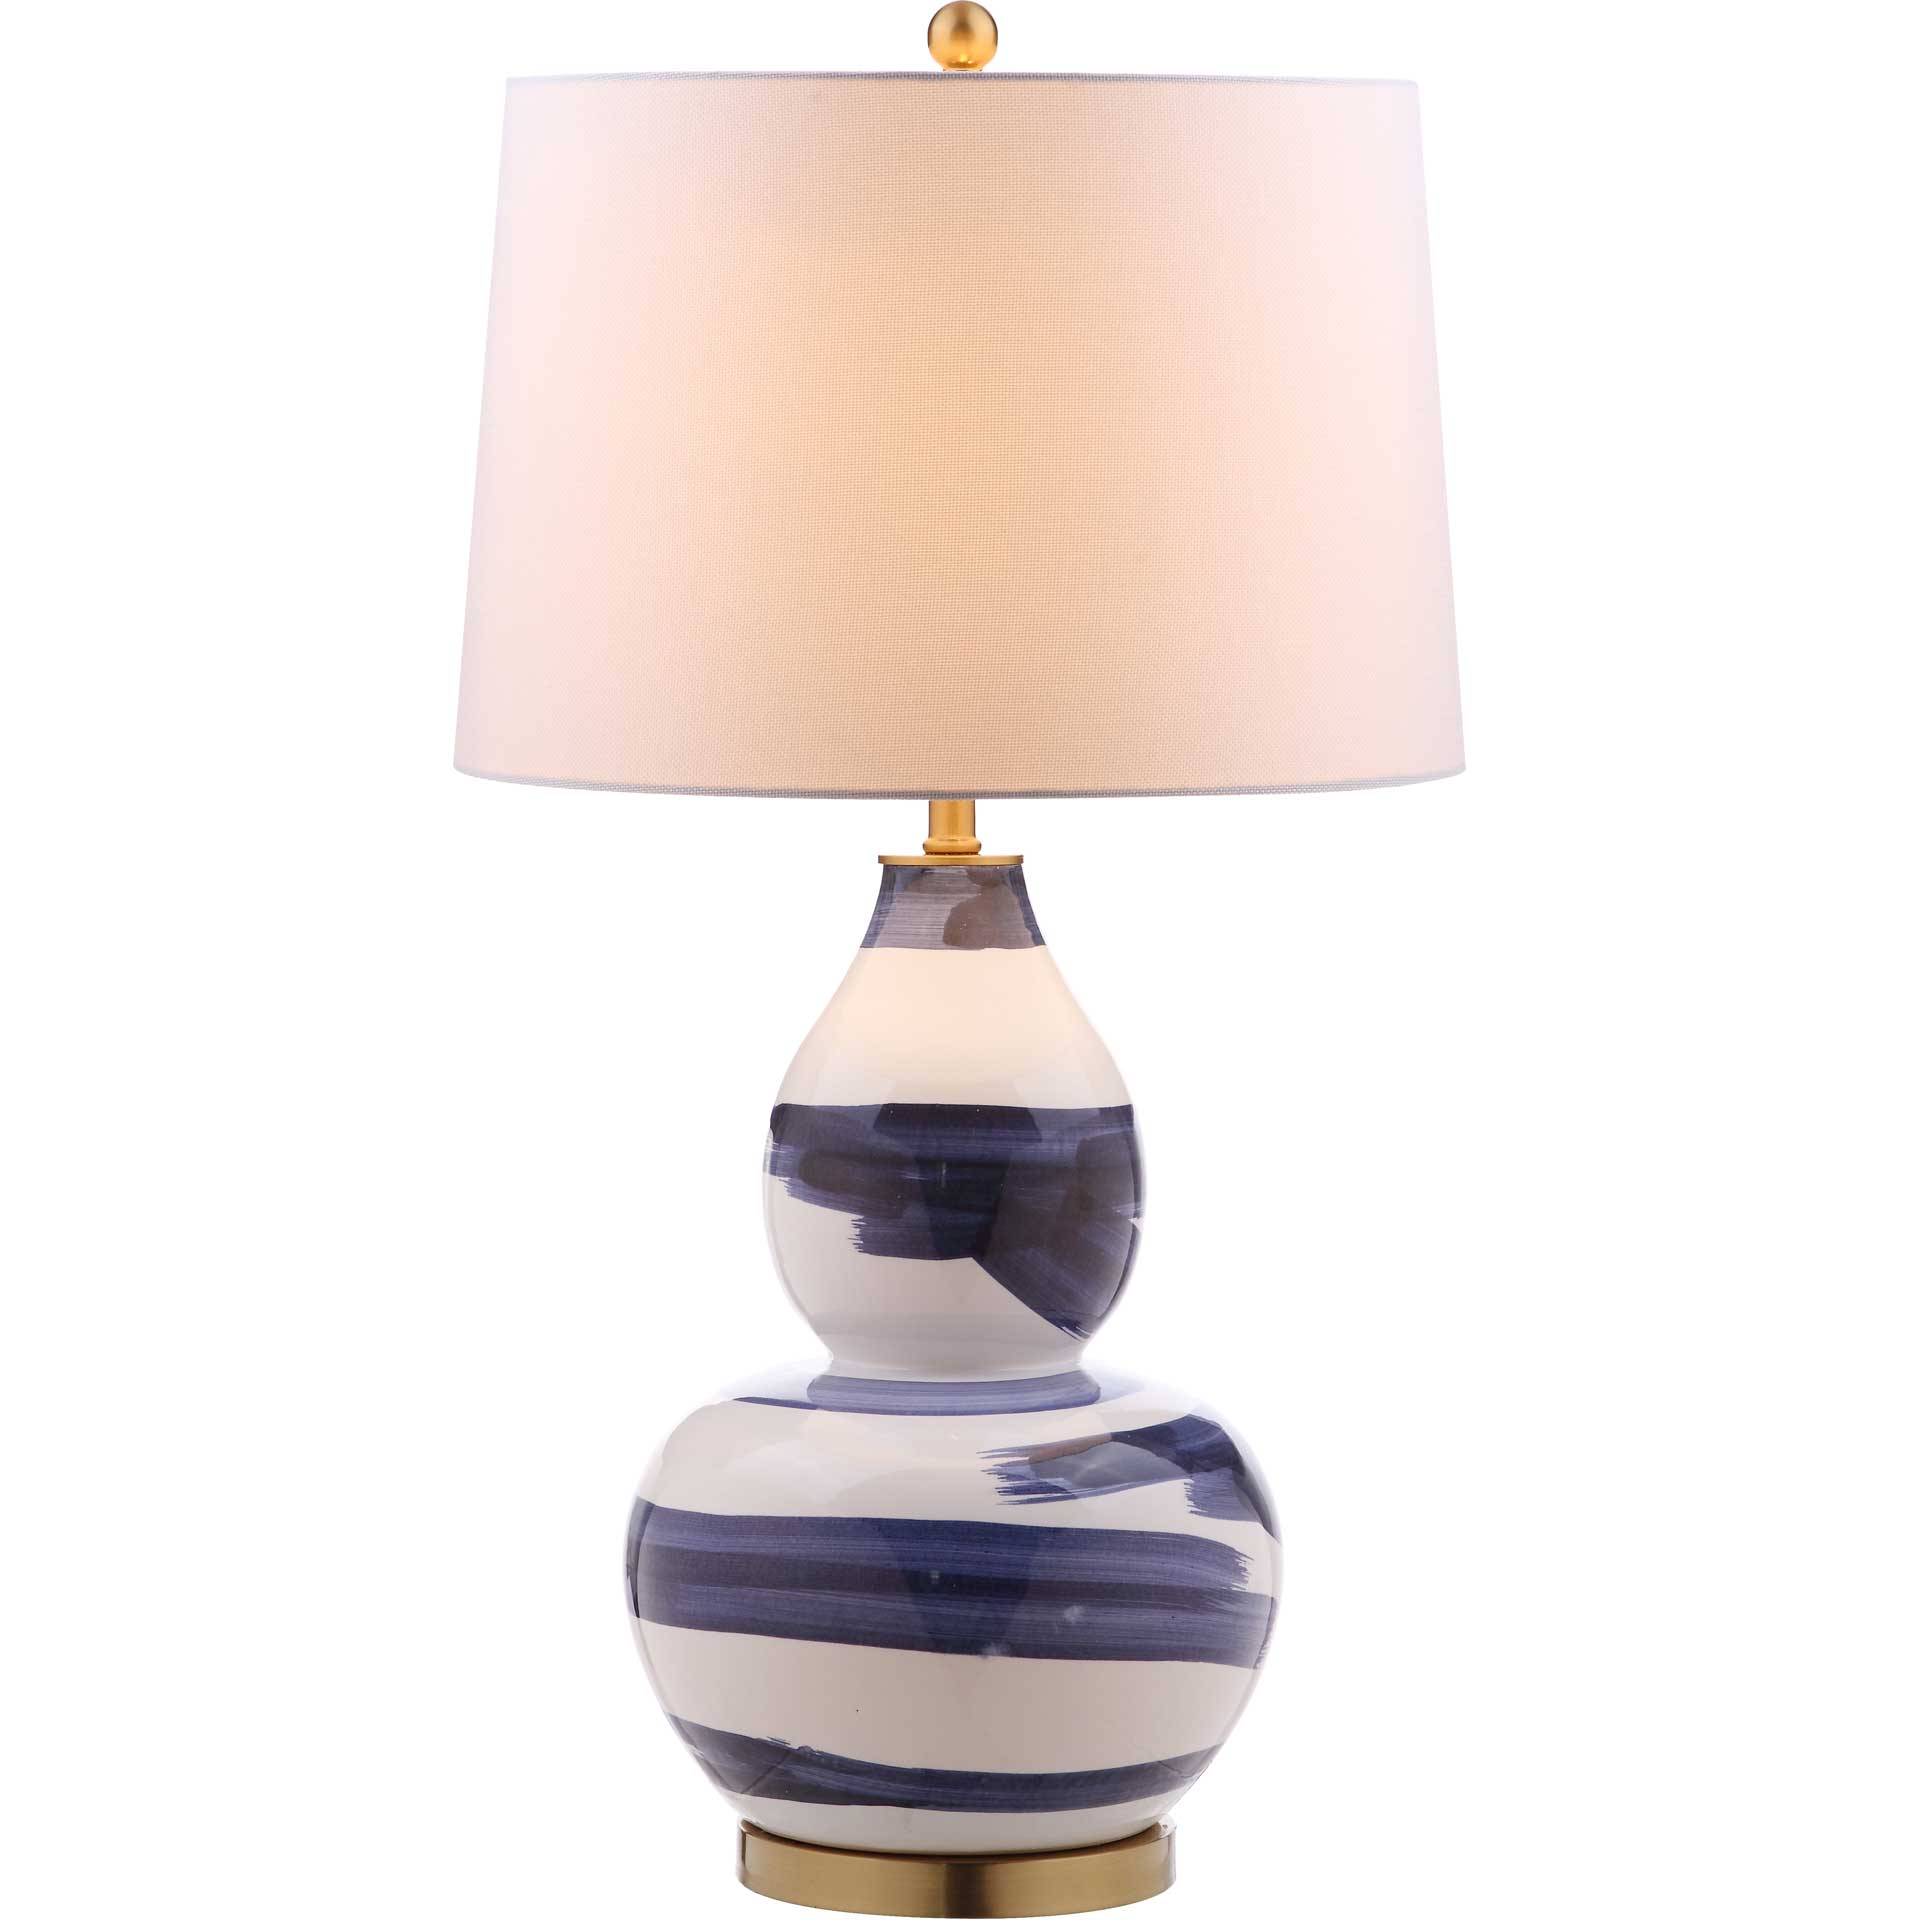 Ailey Table Lamp Blue/White